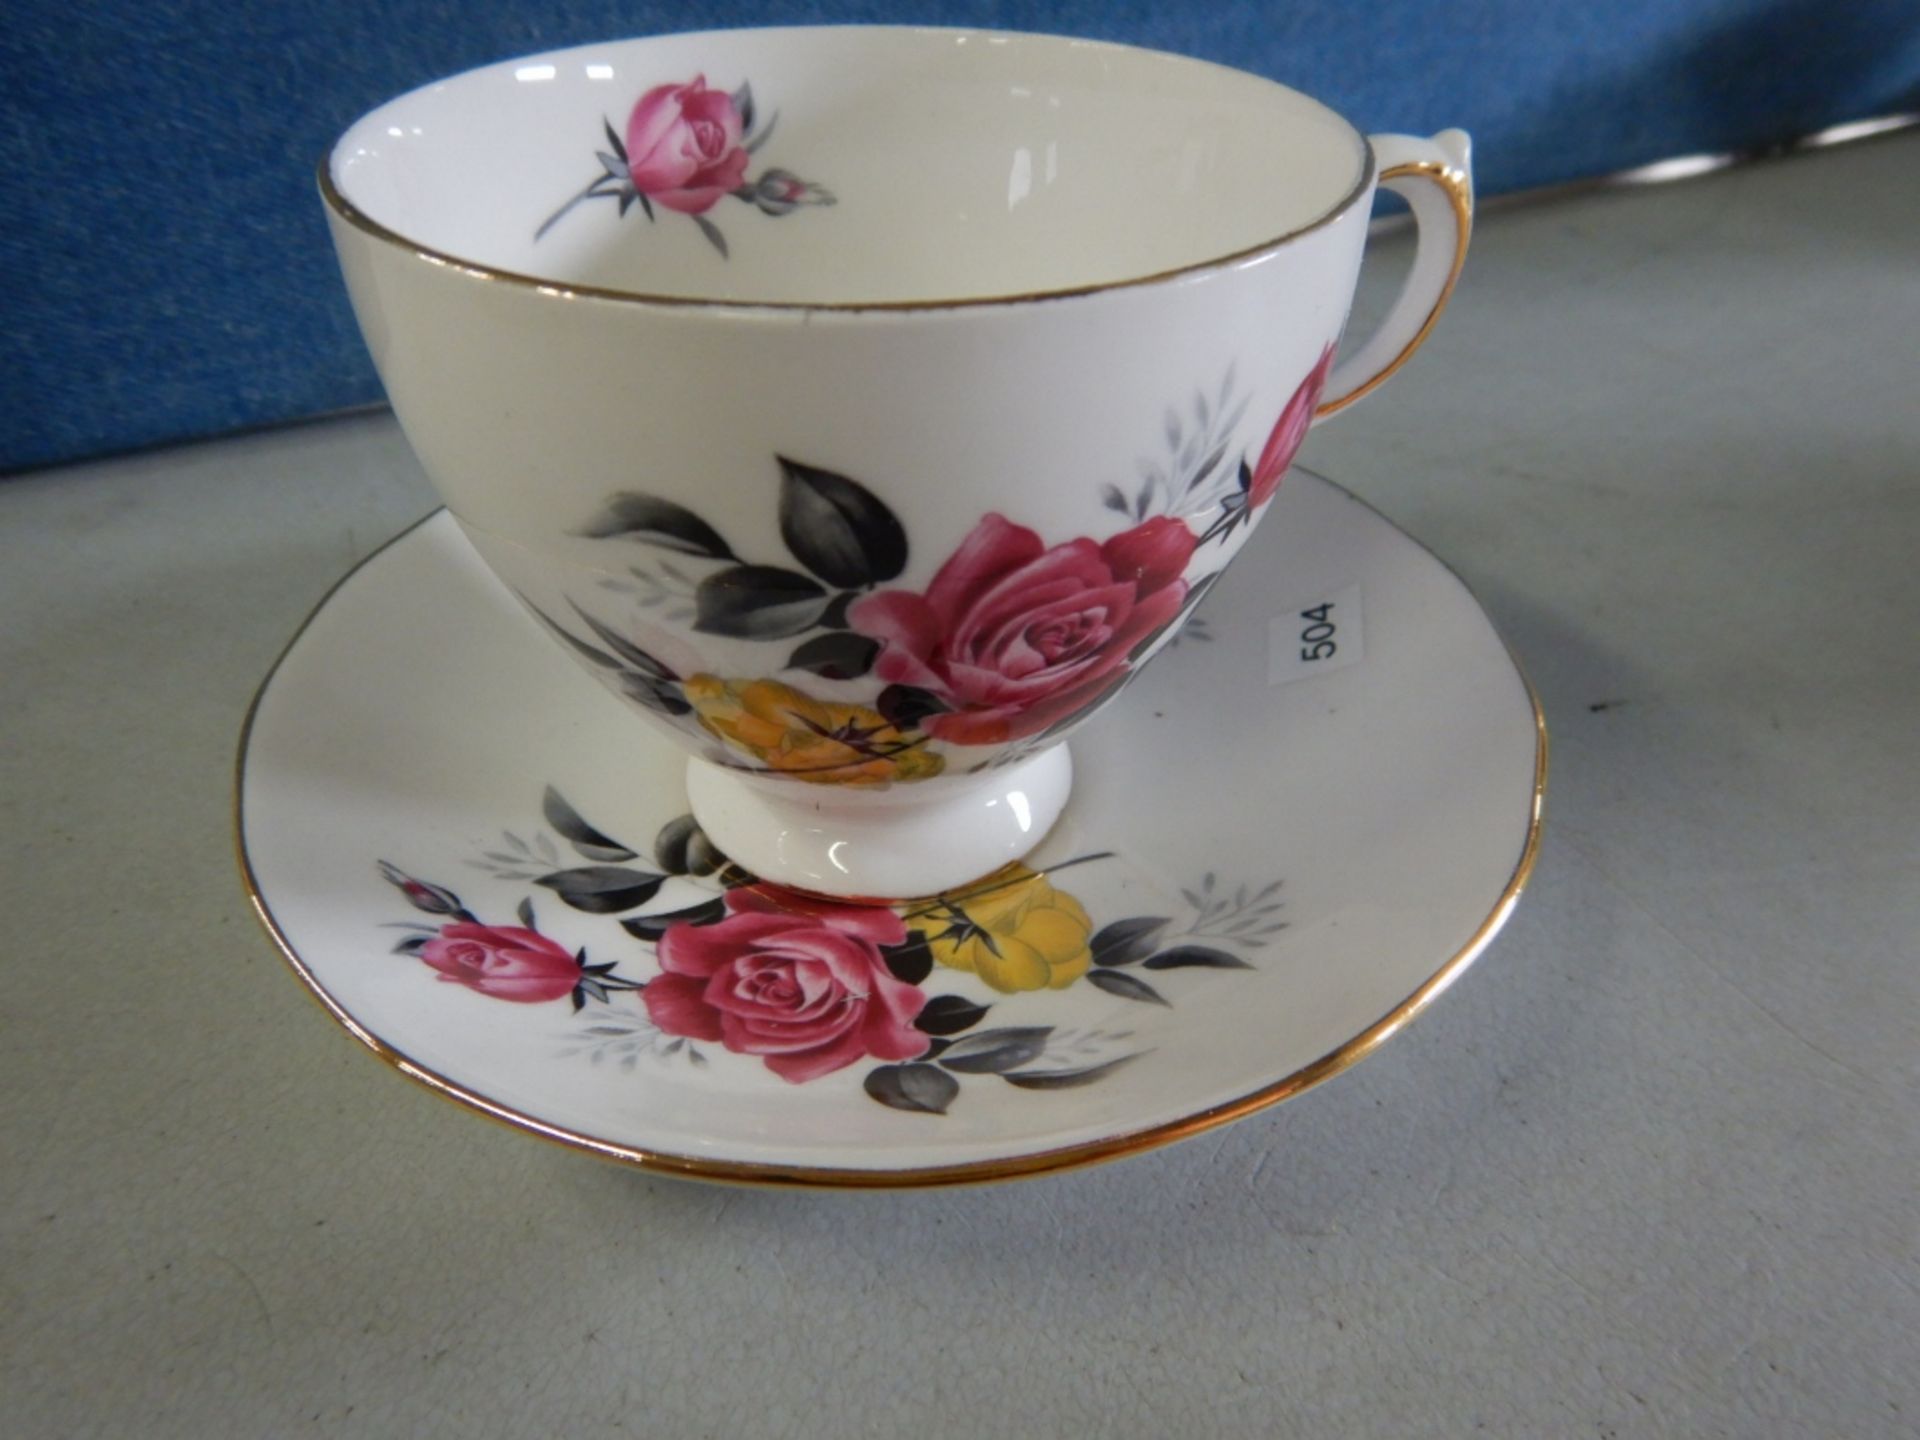 ANTIQUE TEACUPS & SAUCERS - MADE IN ENGLAND - LOT OF 7 - BONE CHINA #8273 - YELLOW FLOWERS, # - Image 15 of 33